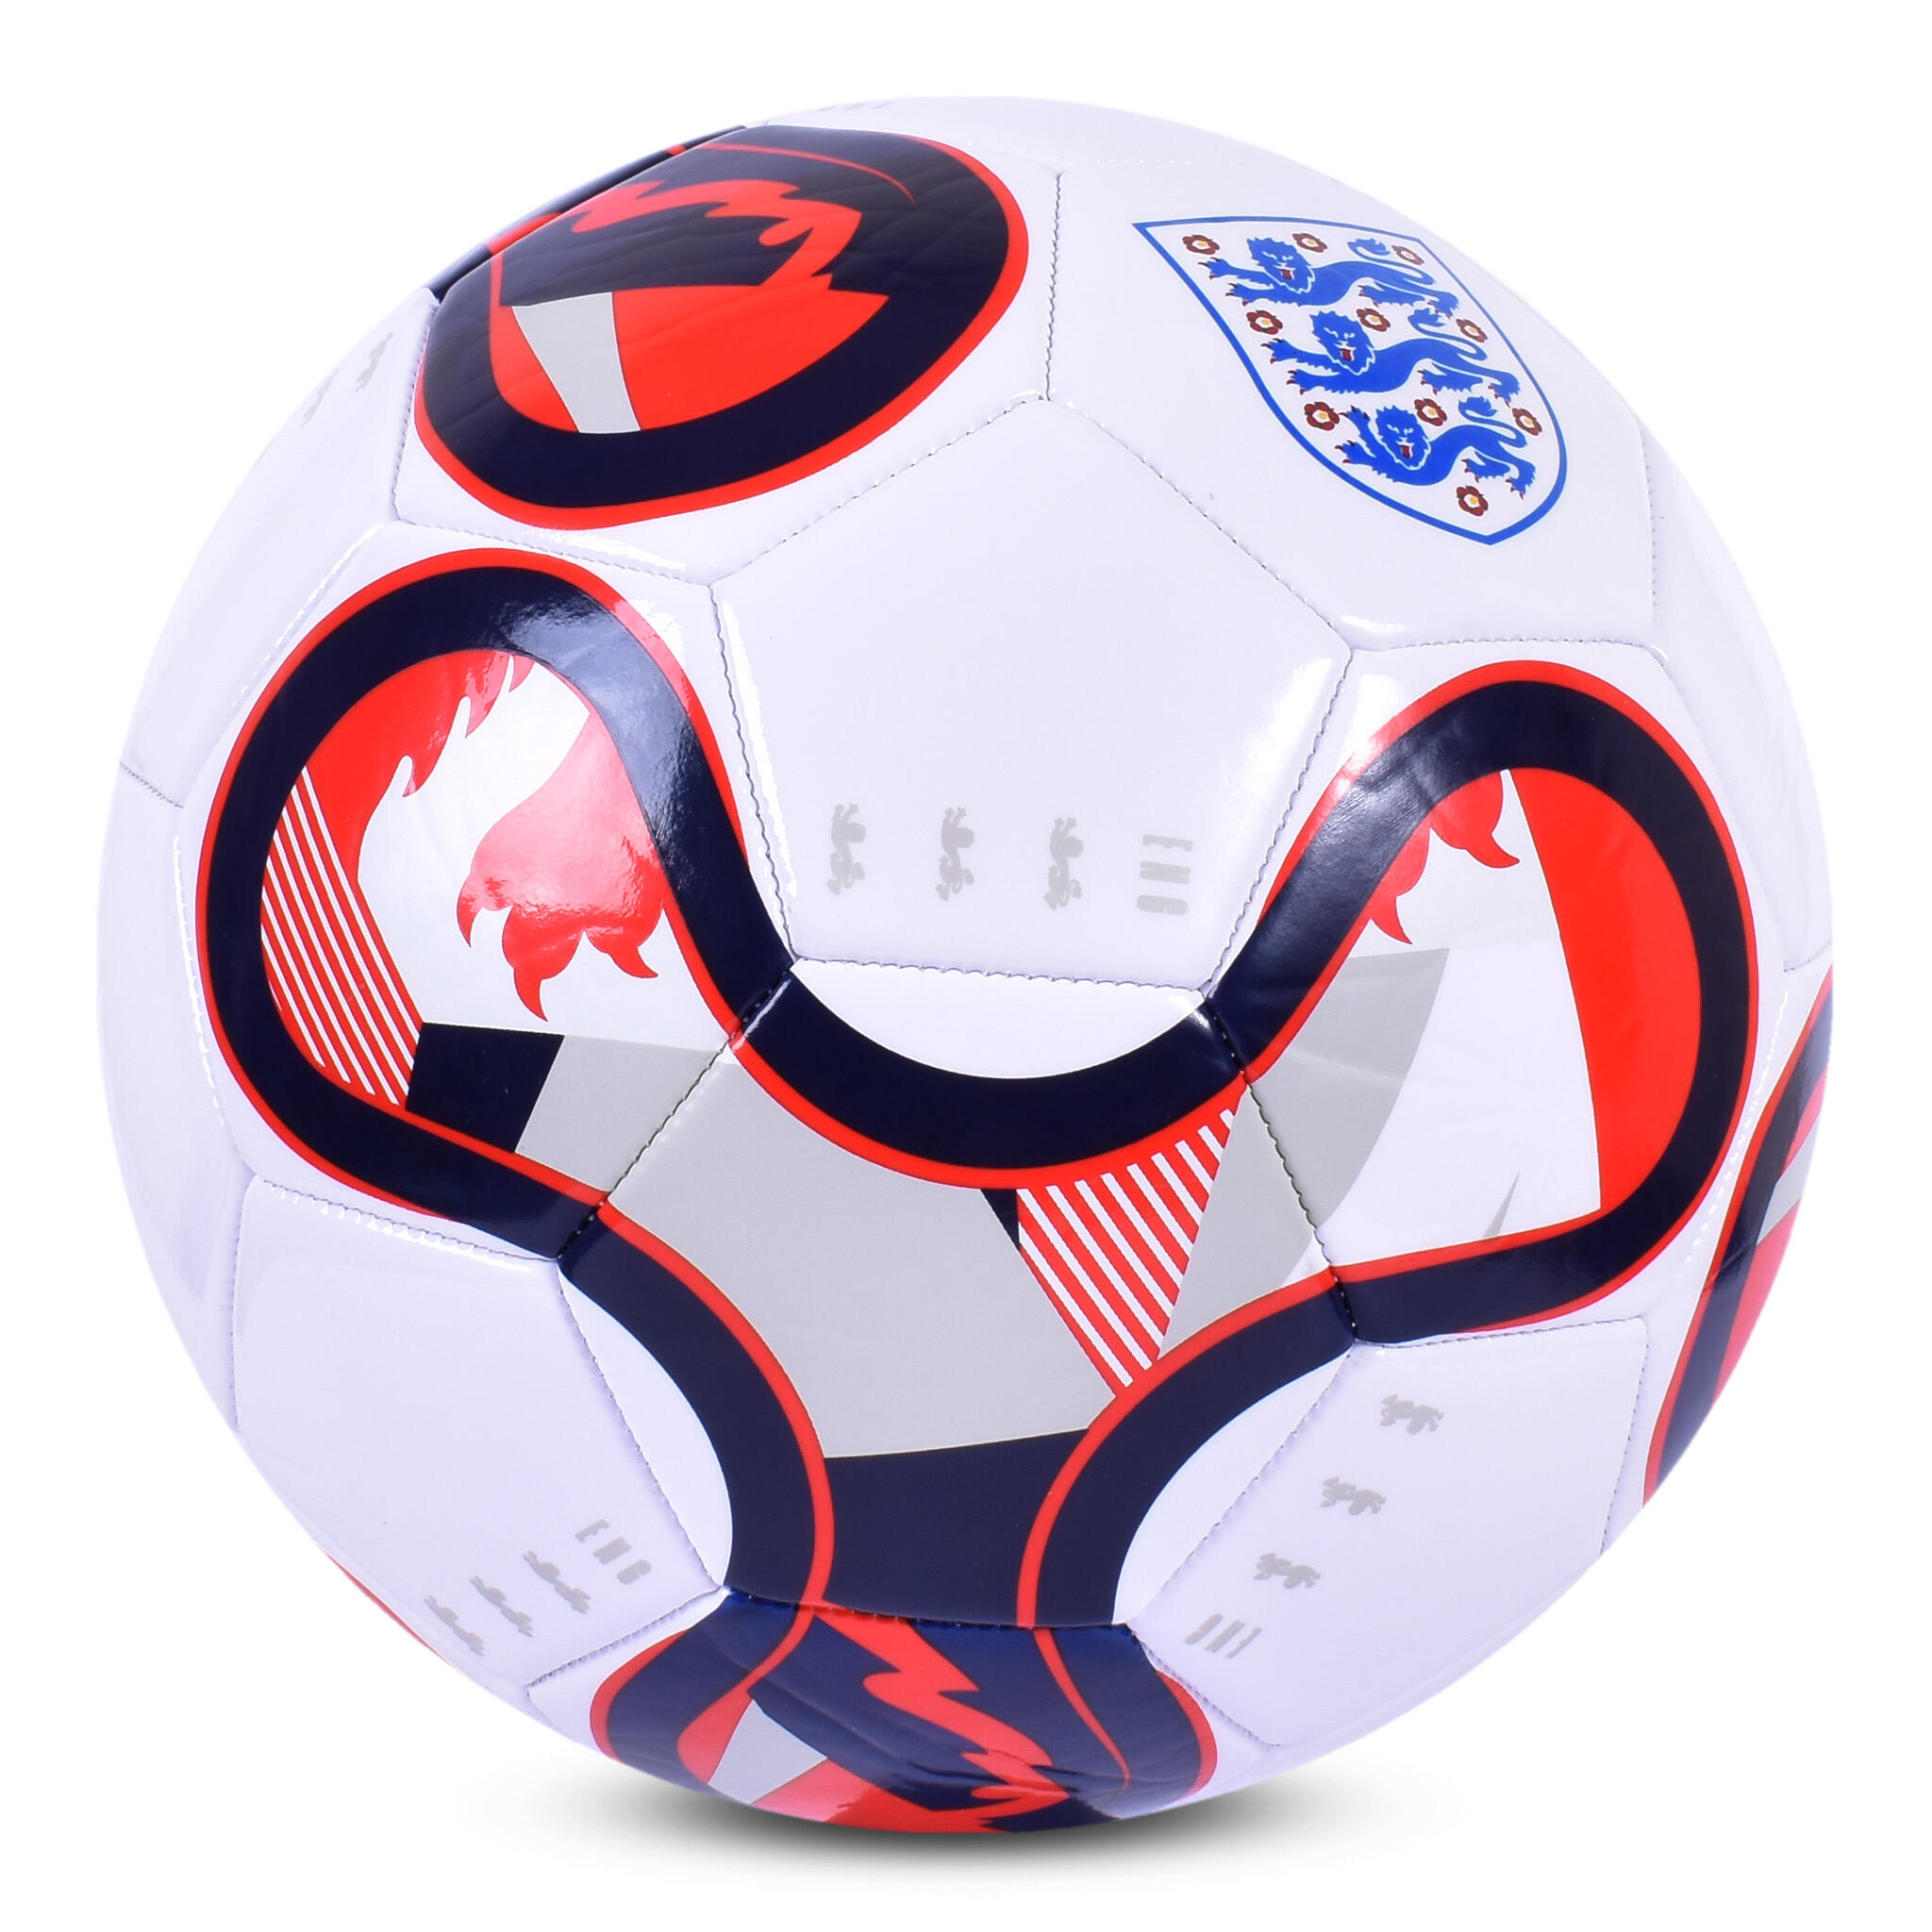 England Supporter Football Size 5 White Red Blue 3/3